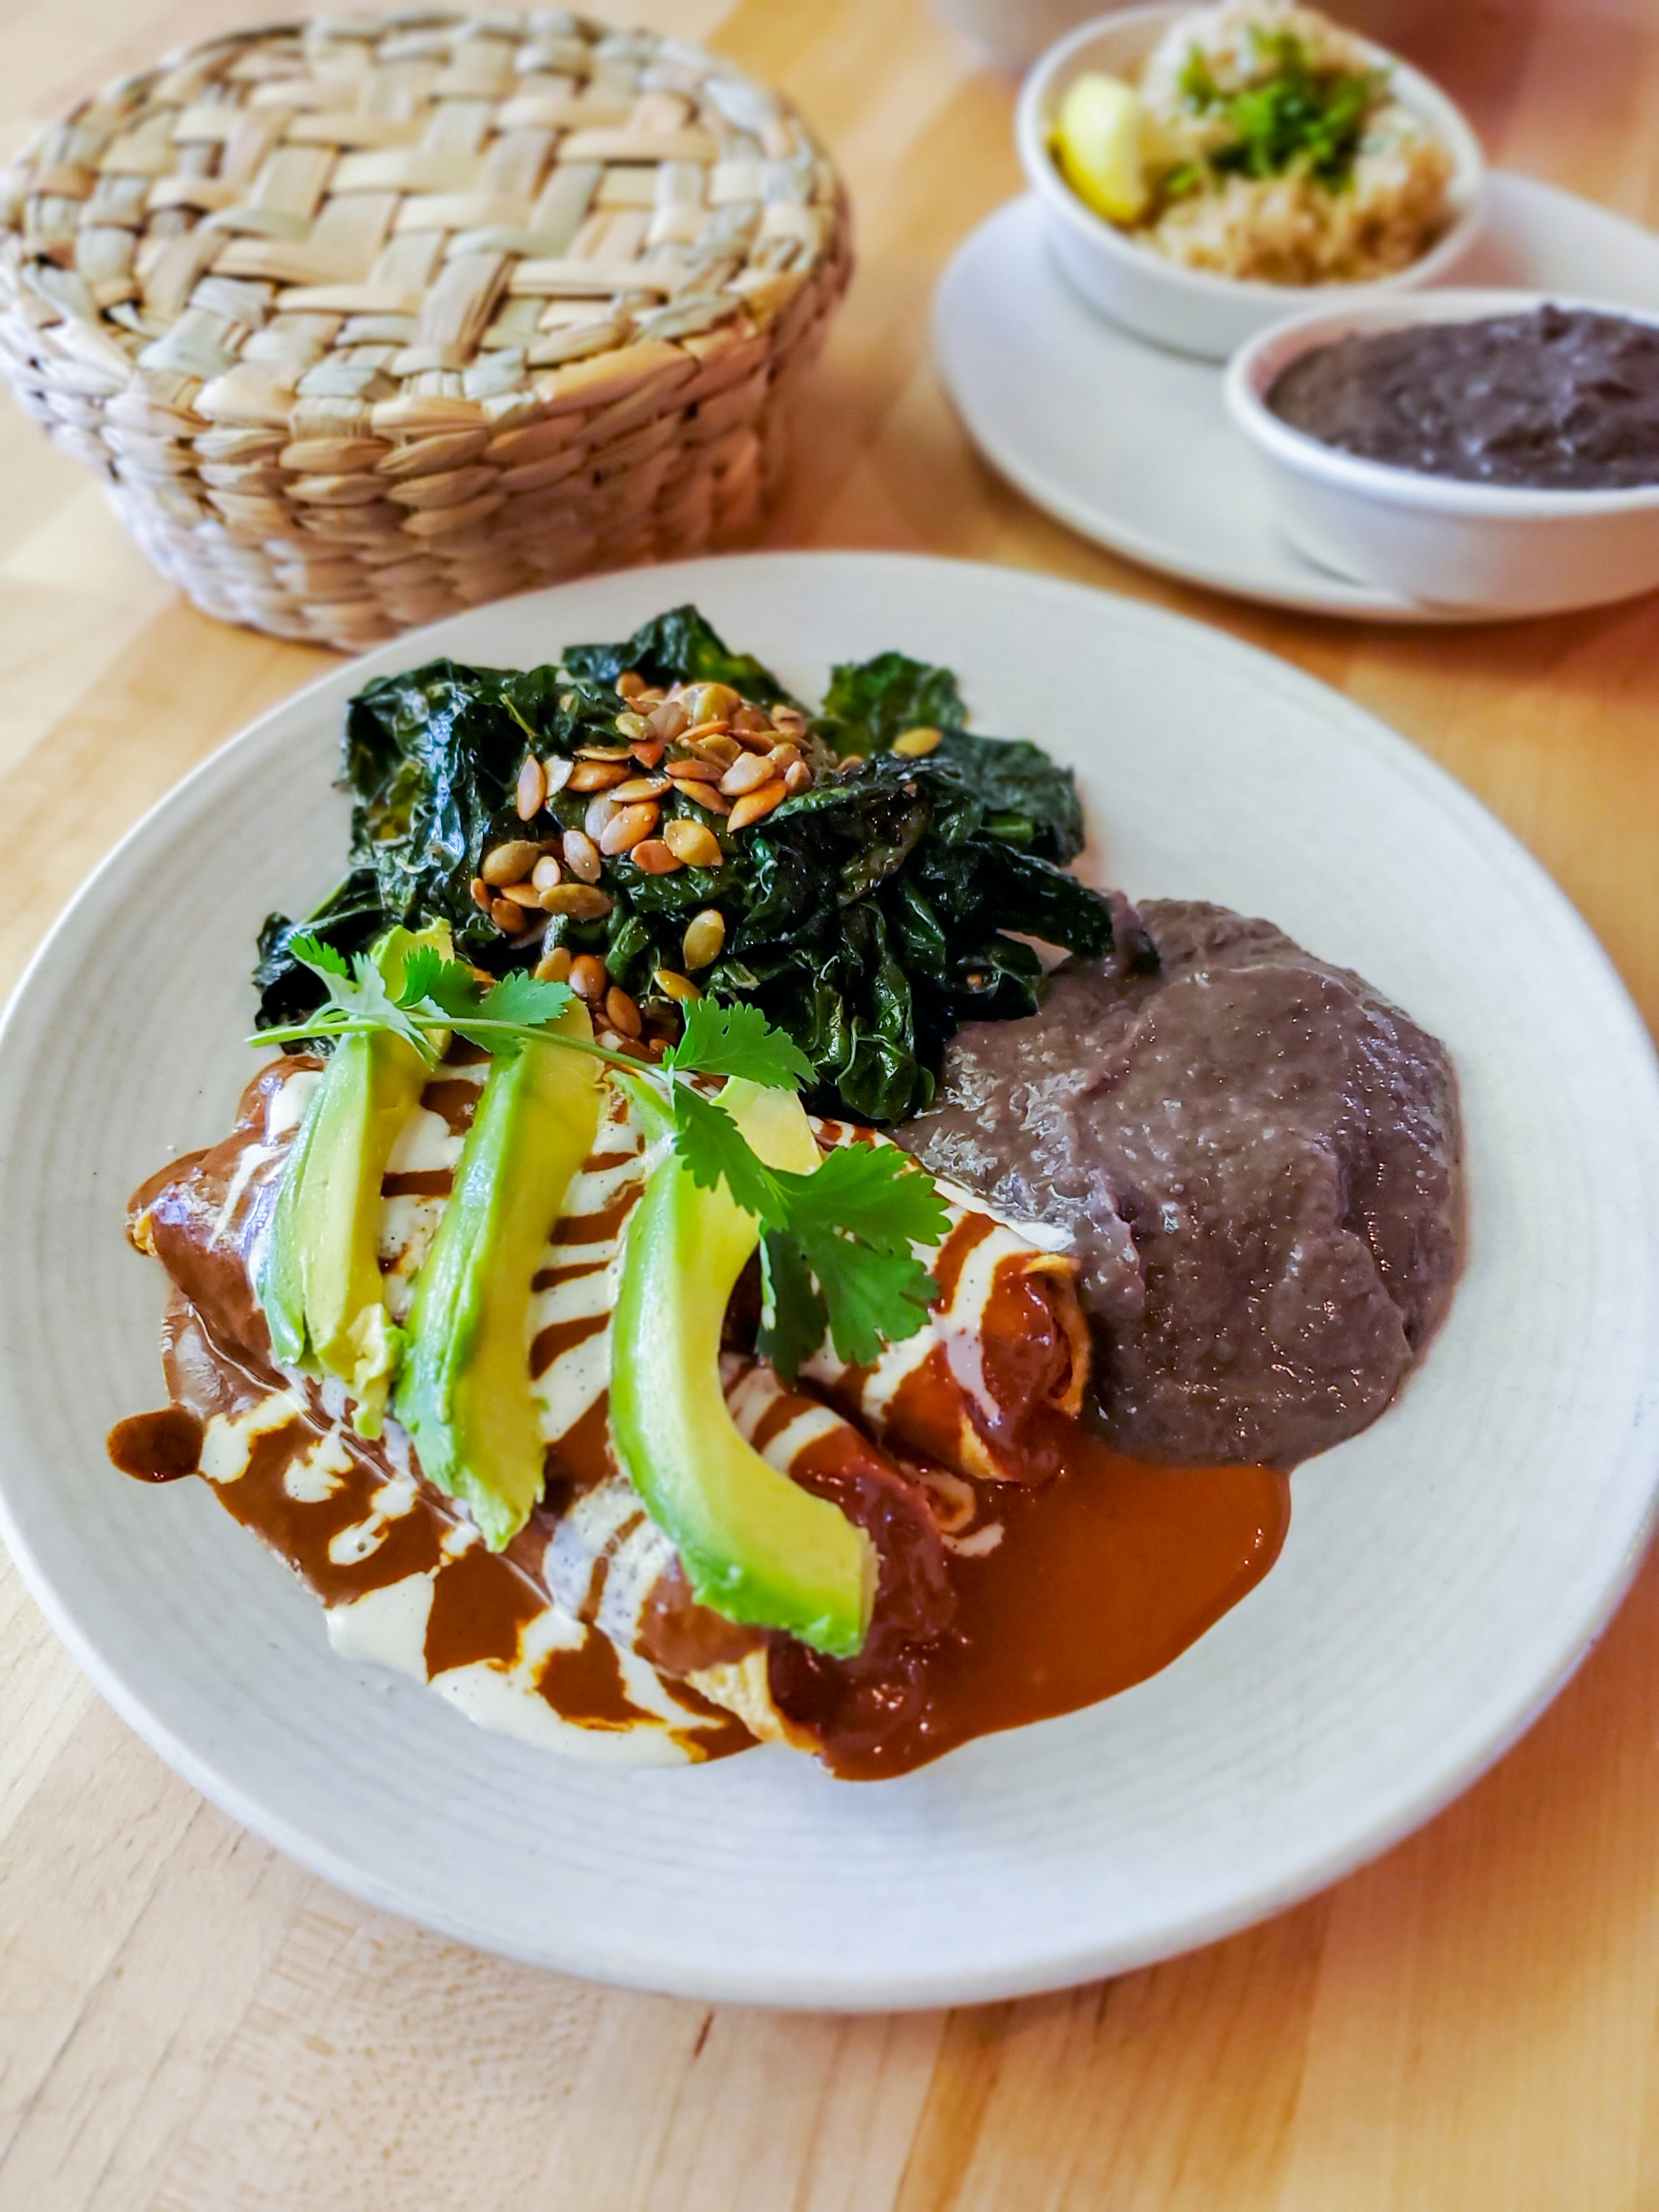 A plate filled with vegan enchiladas, sliced avocado, refried beans and greens topped with pine nuts; Bay Area vegan restaurant 